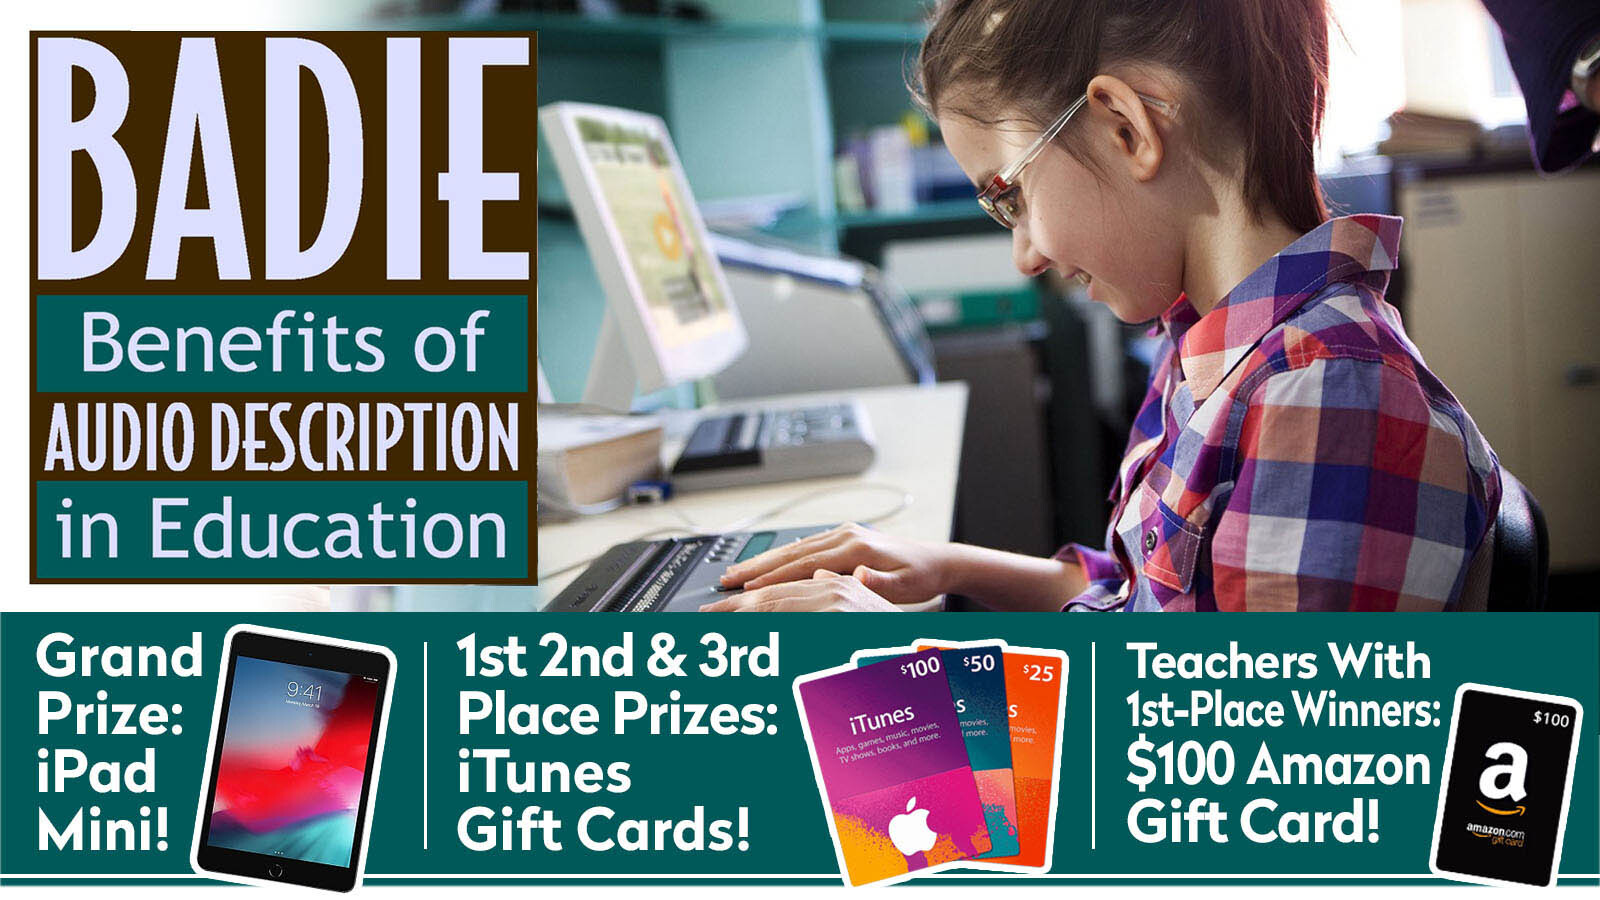 A girl with glasses and a ponytail uses a refreshable braille device. Text says BADIE Benefits of Audio Description in Education. Grand Prize: iPad Mini! 1st, 2nd, and 3rd place prizes: iTunes gift cards! Teachers with 1st place winners: $100 Amazon gift card!